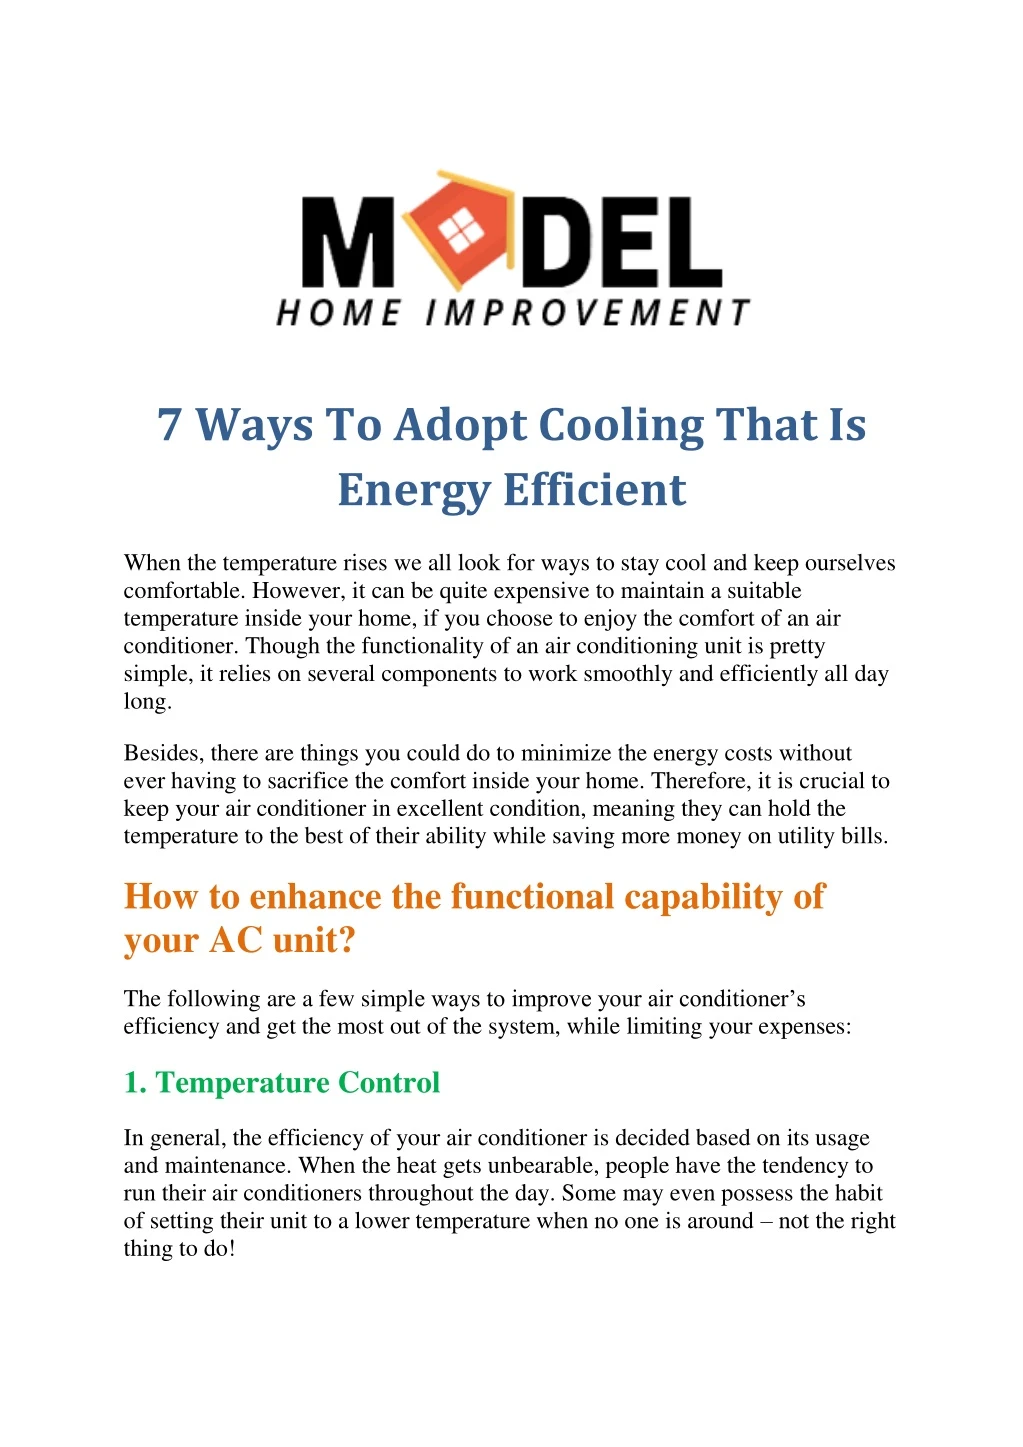 7 ways to adopt cooling that is energy efficient